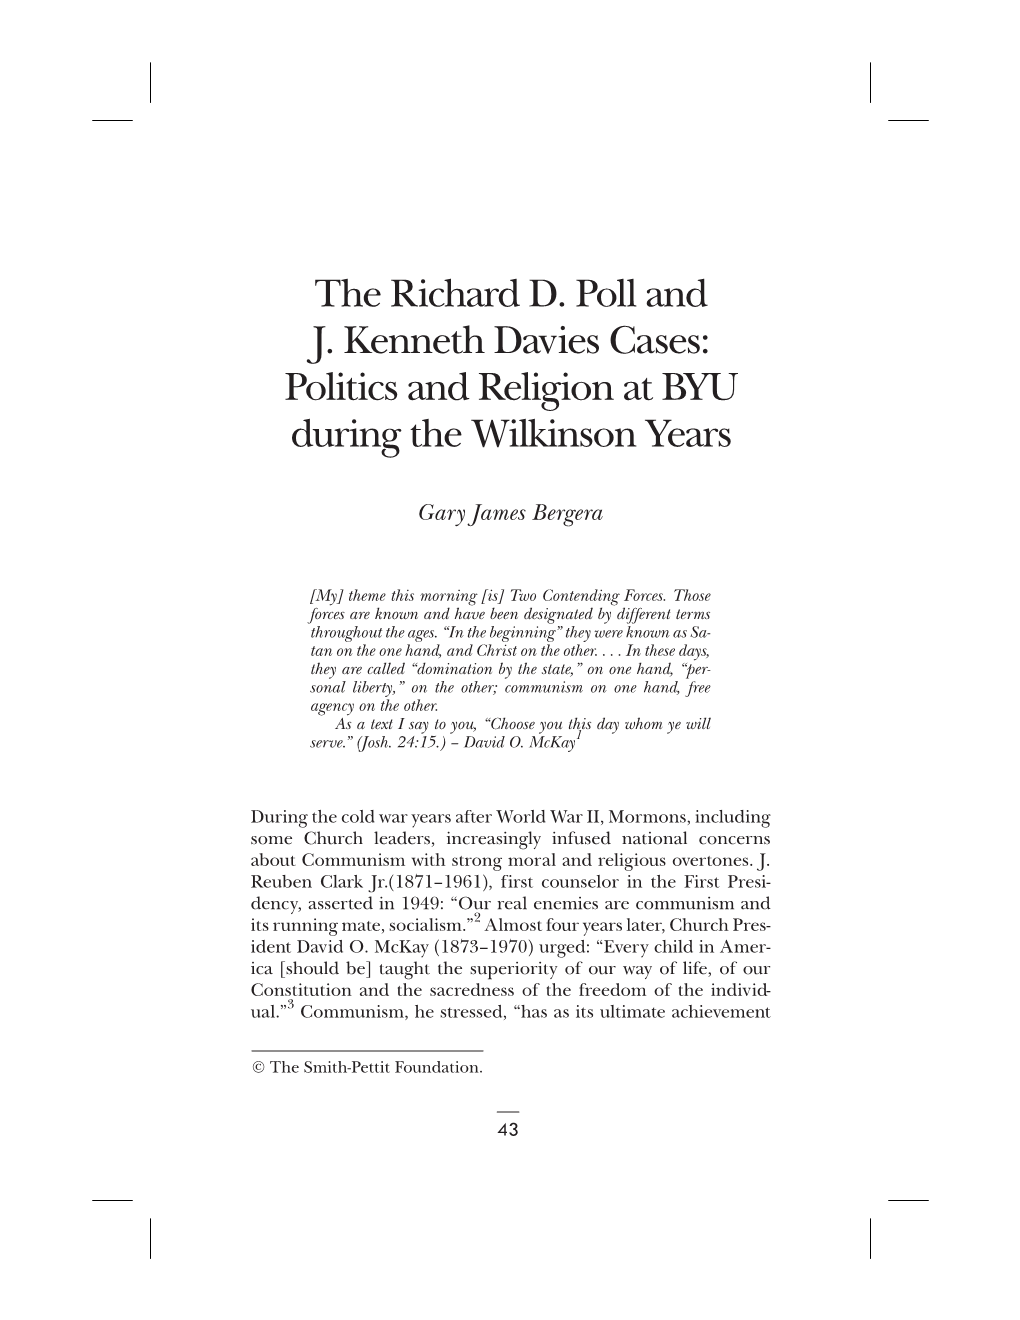 The Richard D. Poll and J. Kenneth Davies Cases: Politics and Religion at BYU During the Wilkinson Years